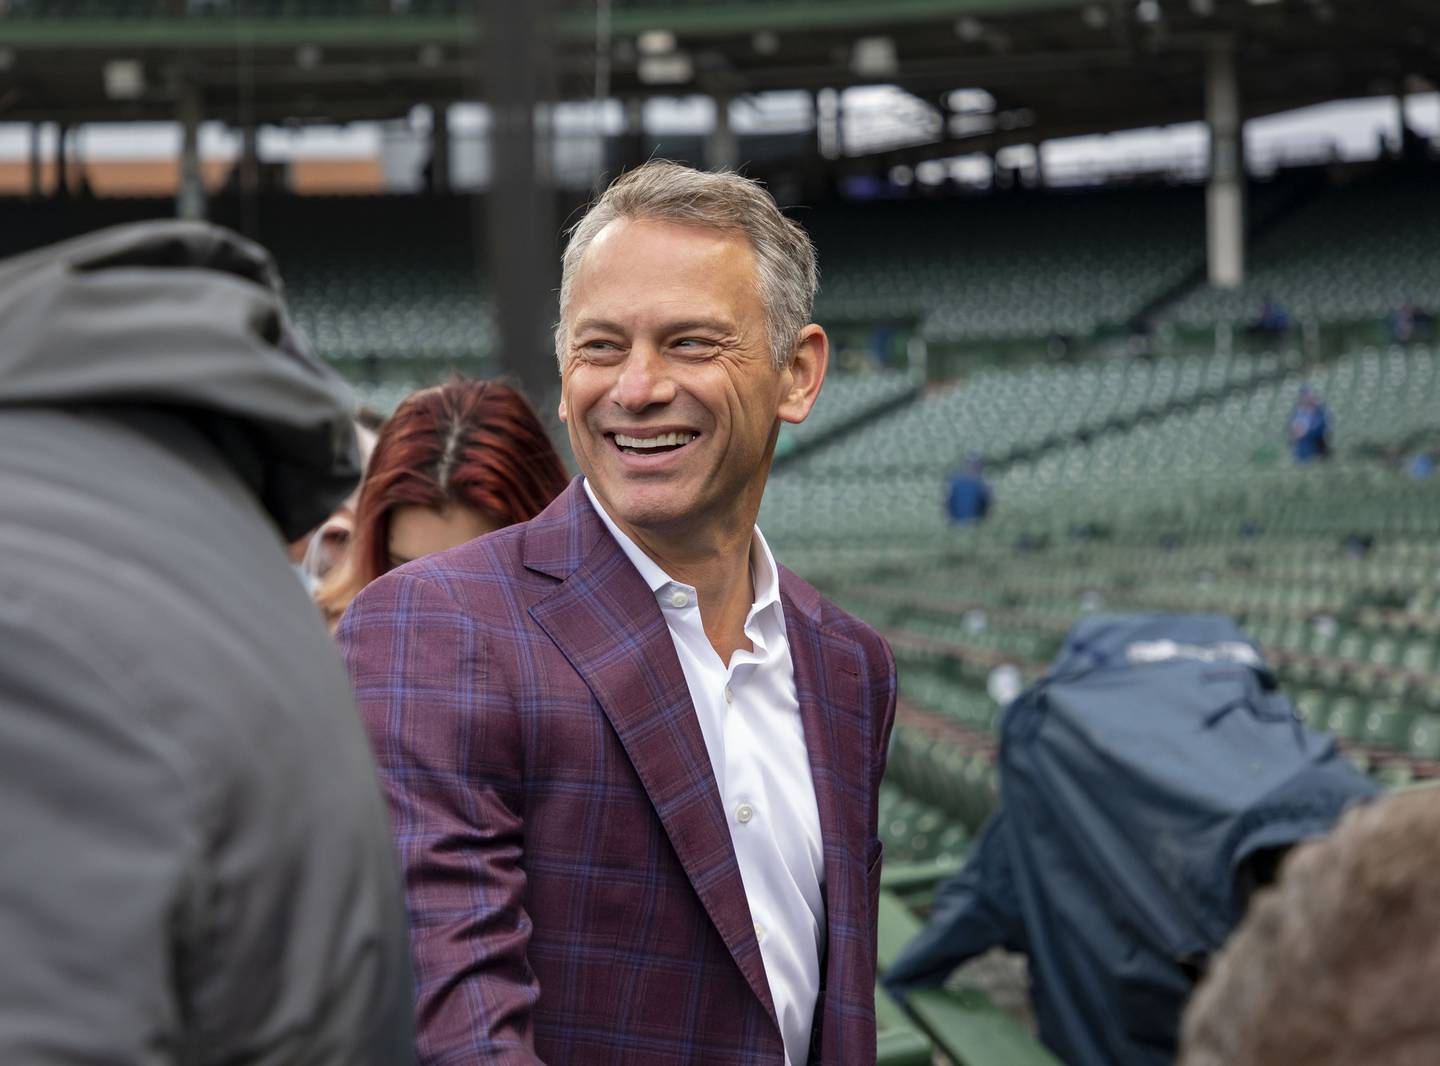 Cubs general manager Jed Hoyer prepares for opening day at Wrigley Field on April 7, 2022.